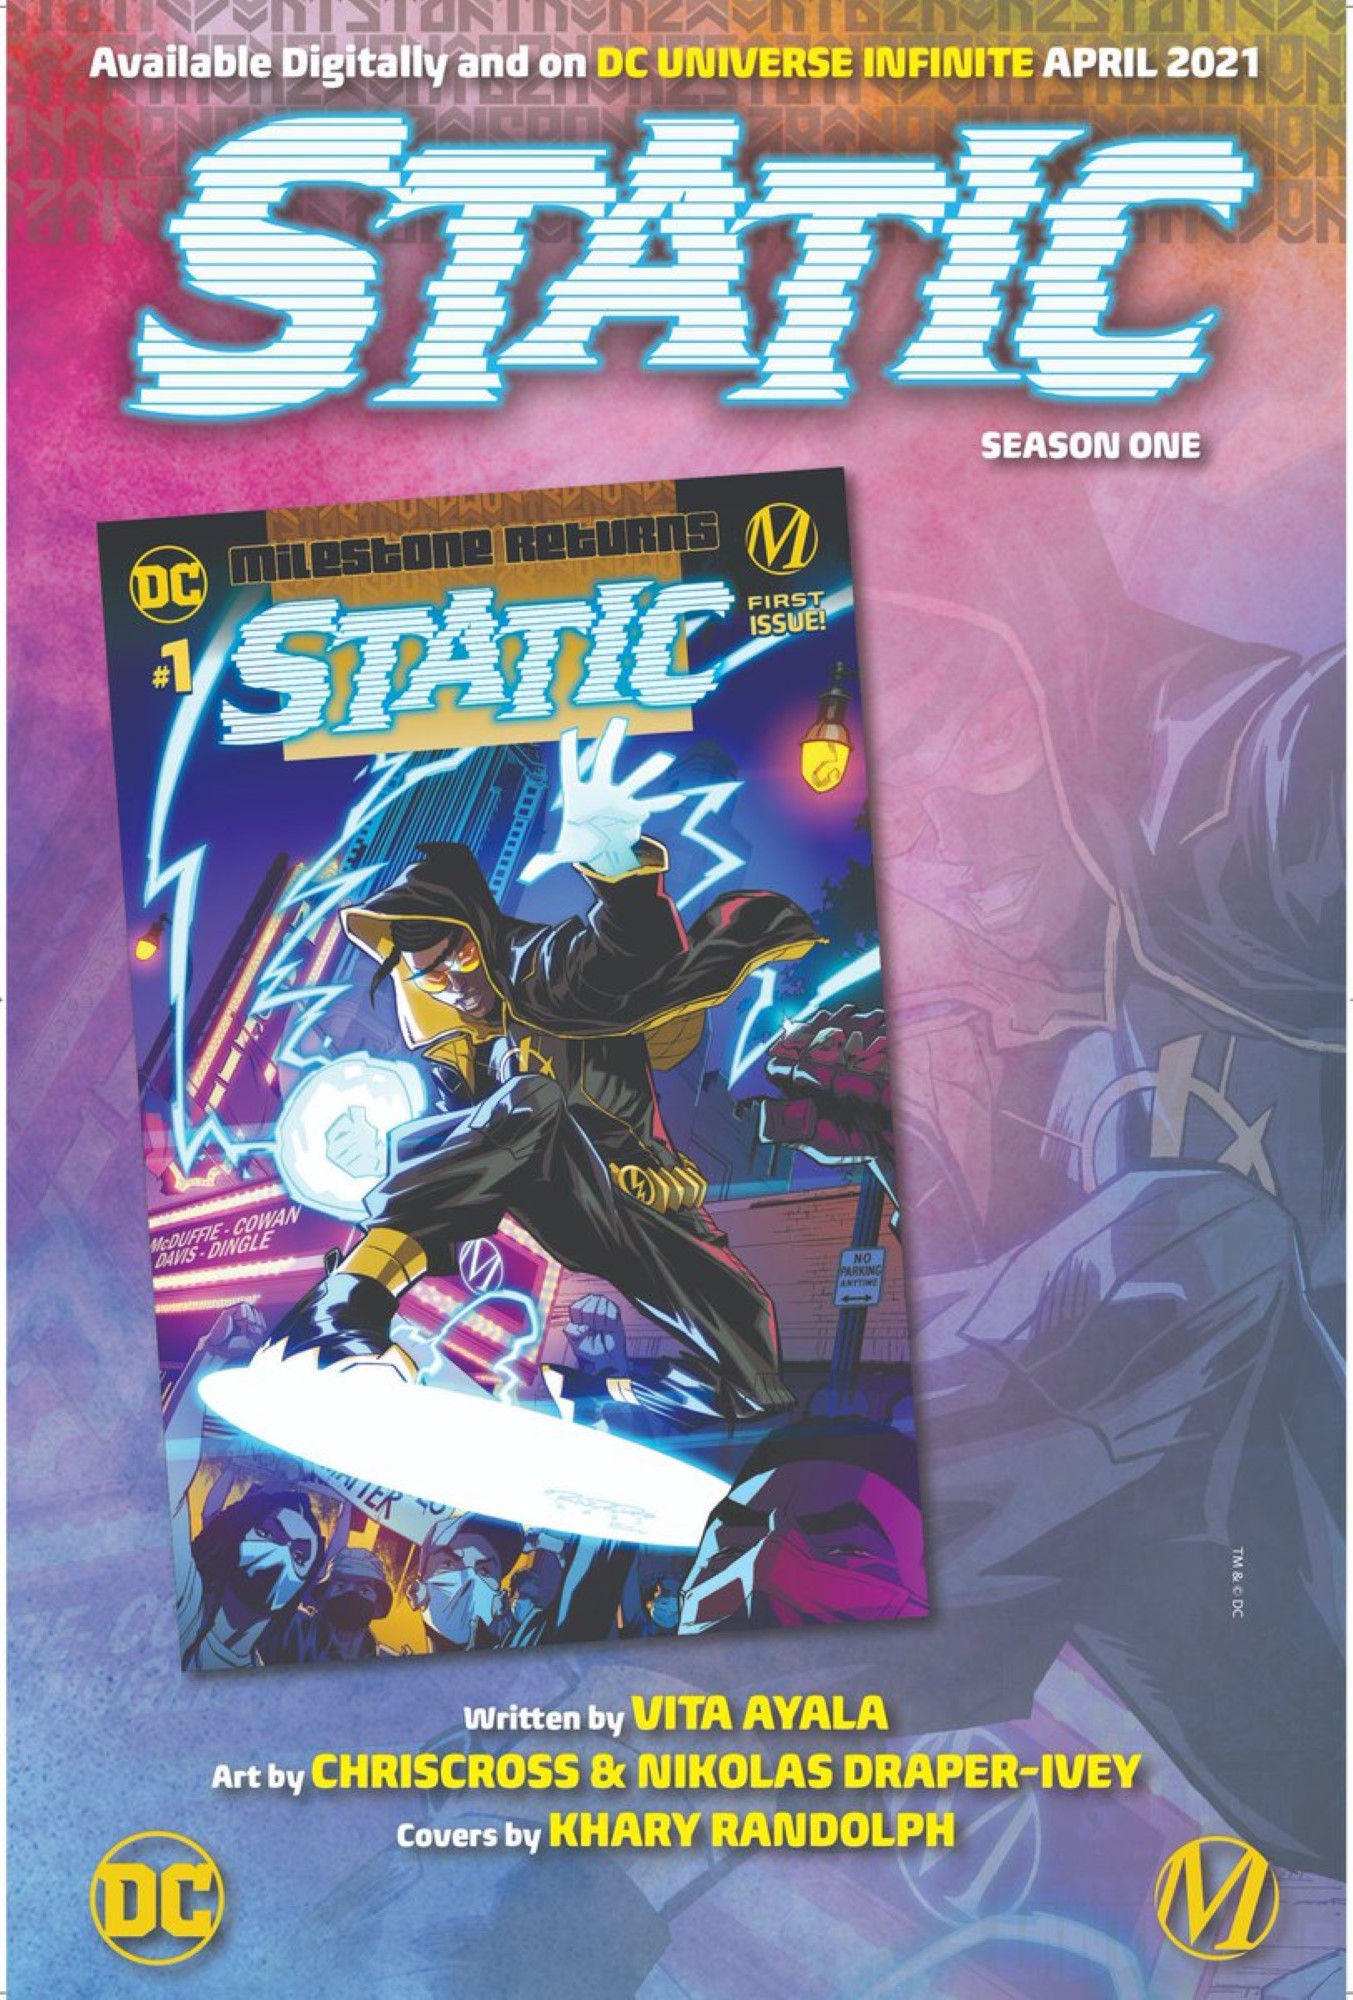 OCT110229 - STATIC SHOCK #4 - Previews World